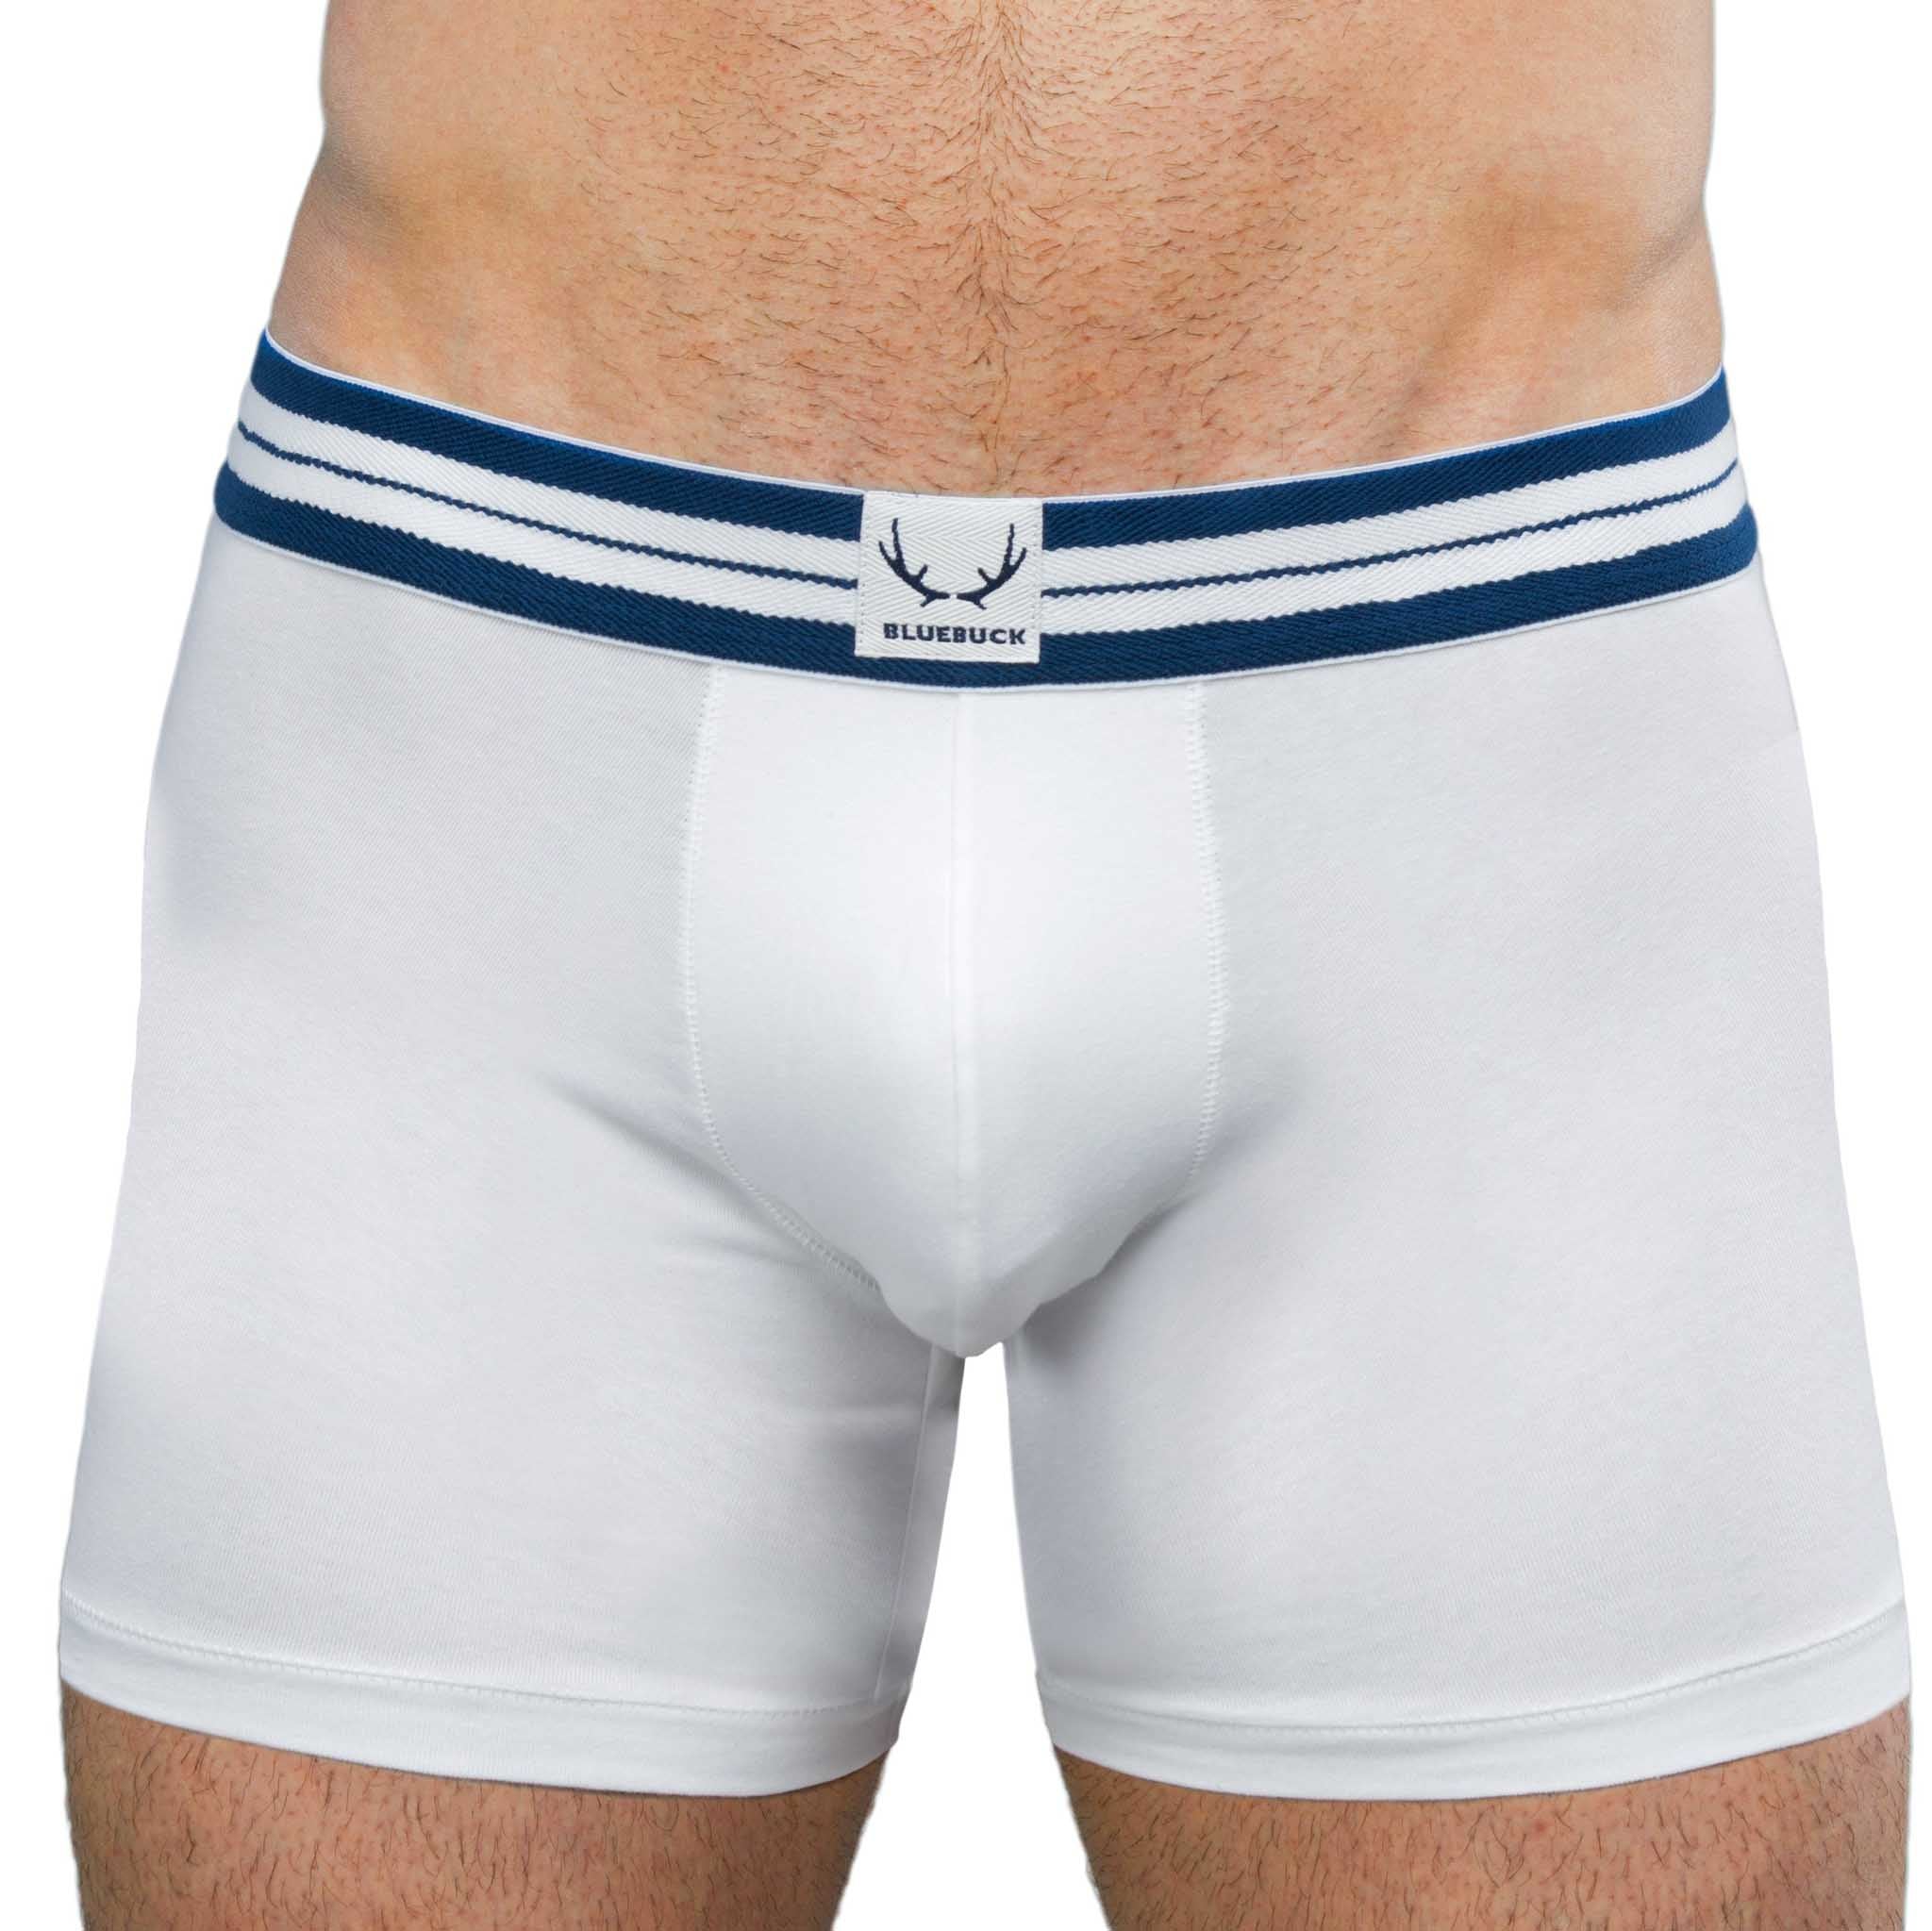 White, long boxer shorts made of organic cotton from Bluebuck